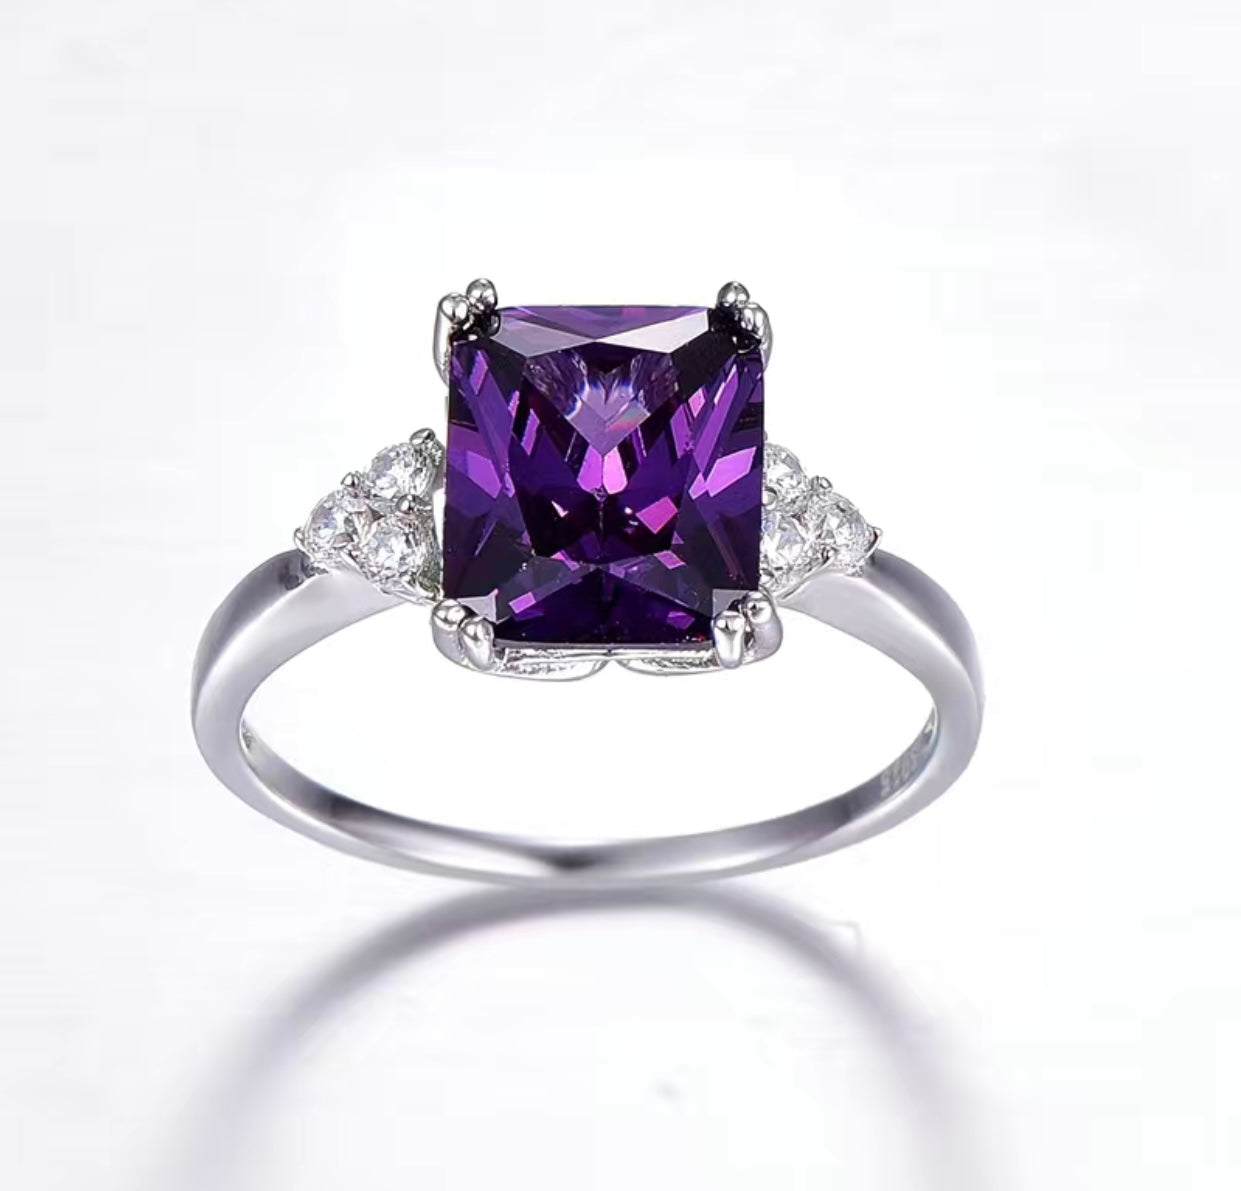 Amethyst Ring With Cubic Zirconias Sterling Silver